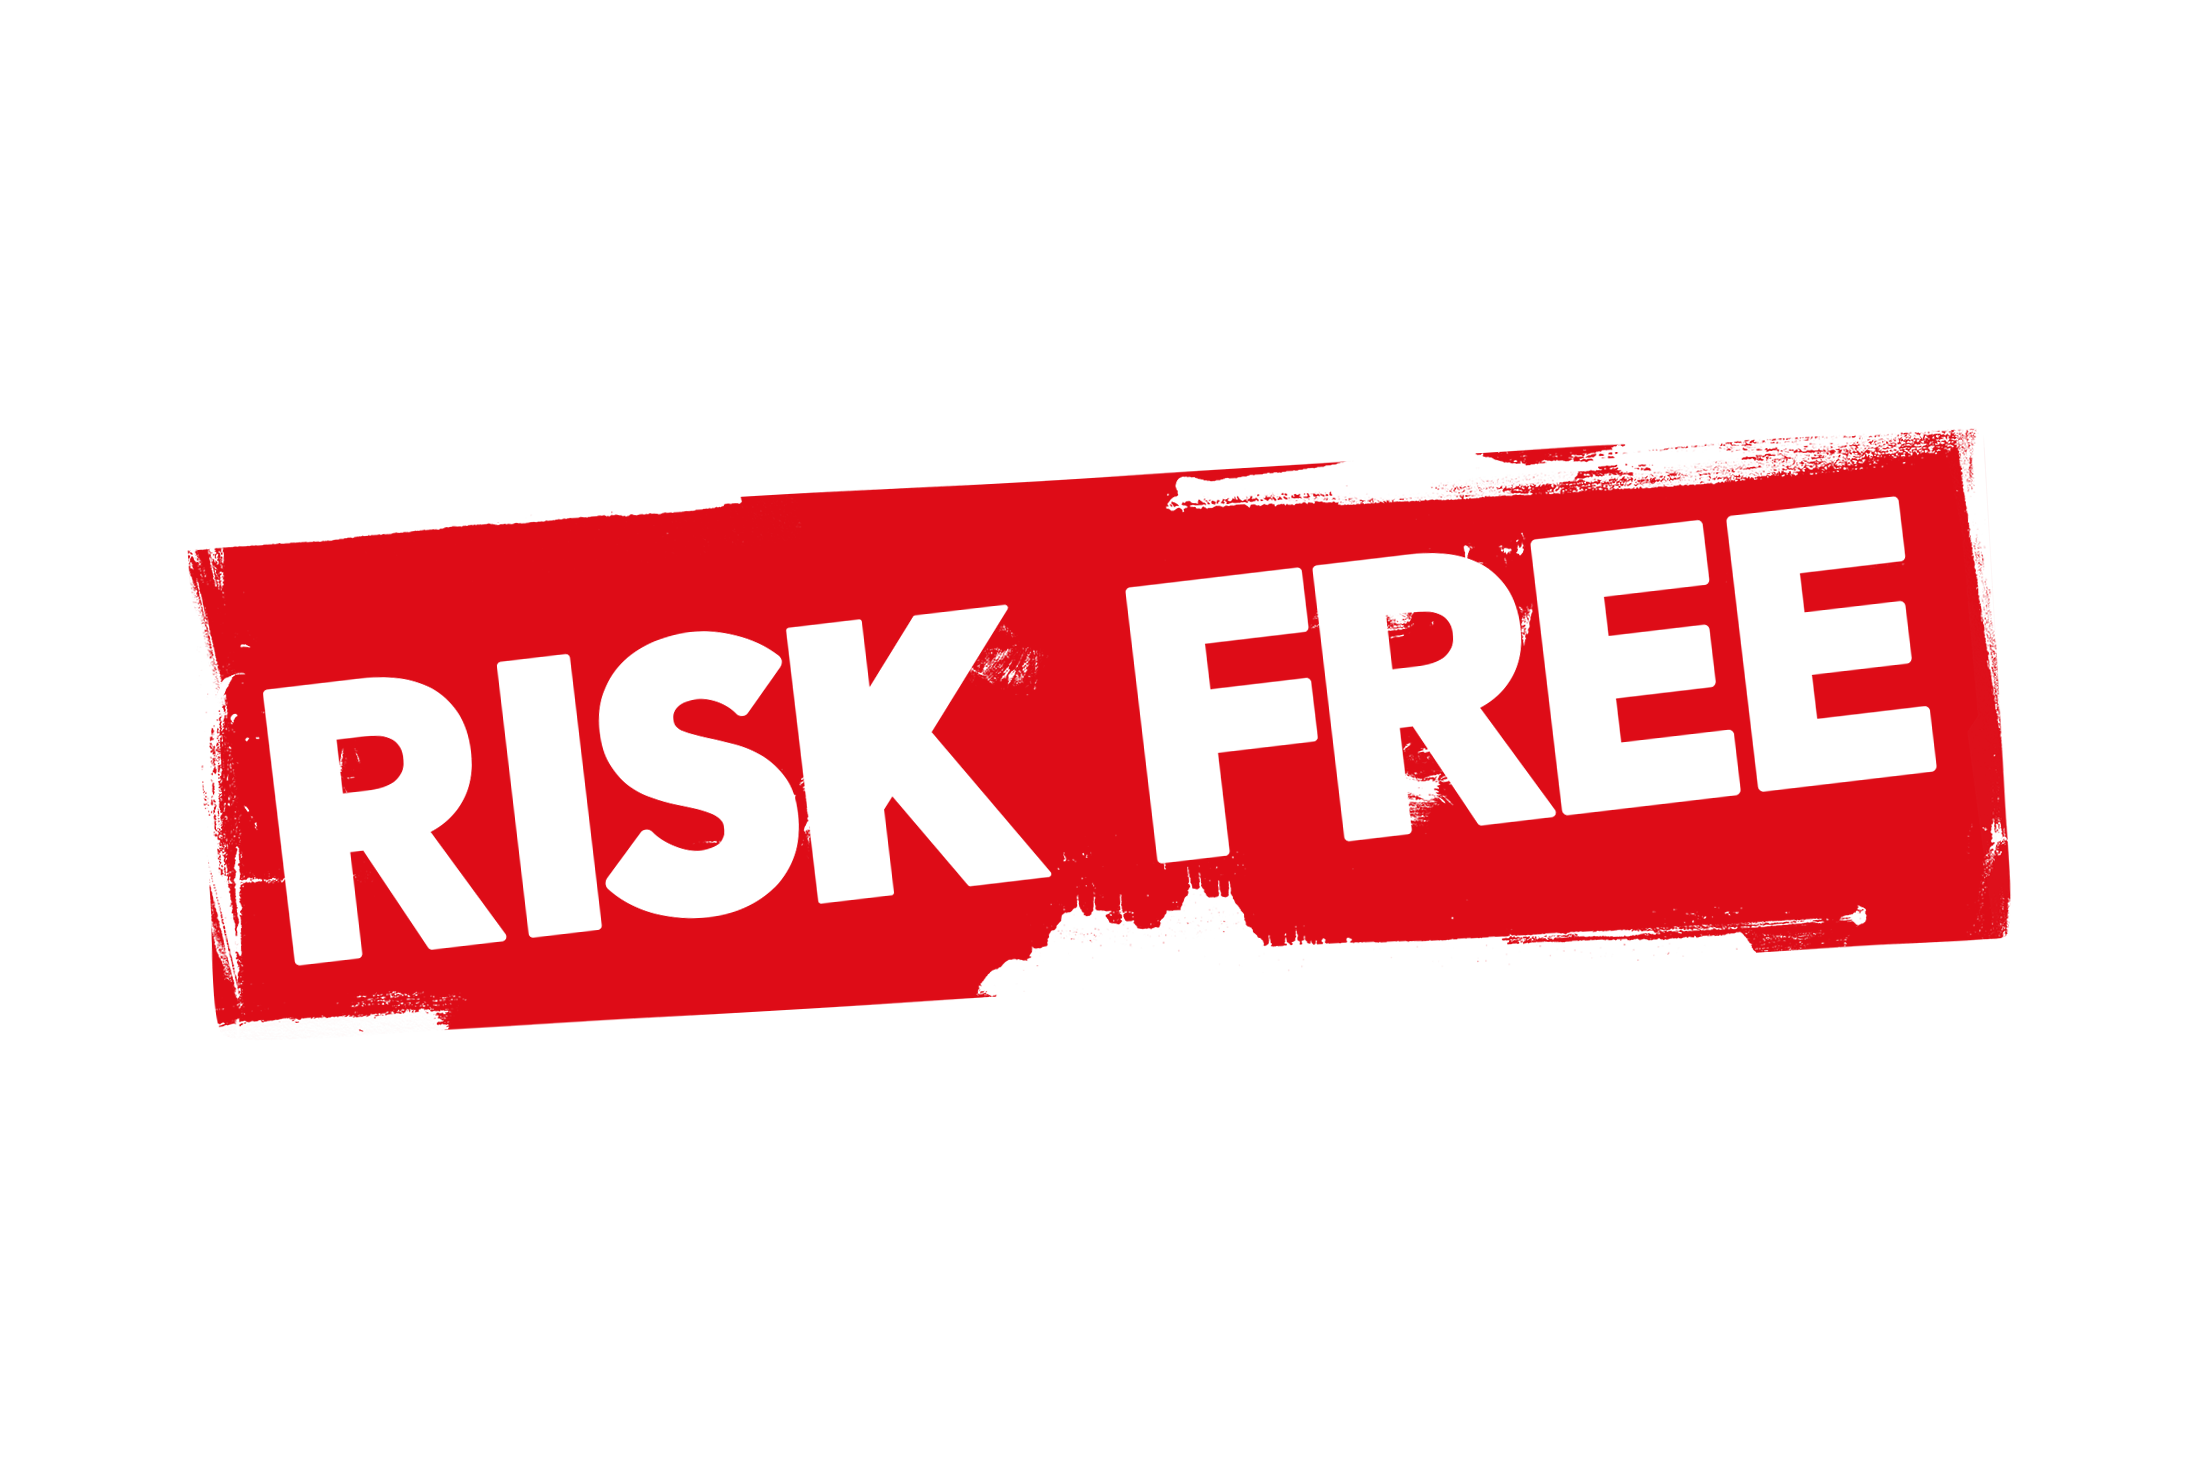 Grunge risk free label PNG and PSD